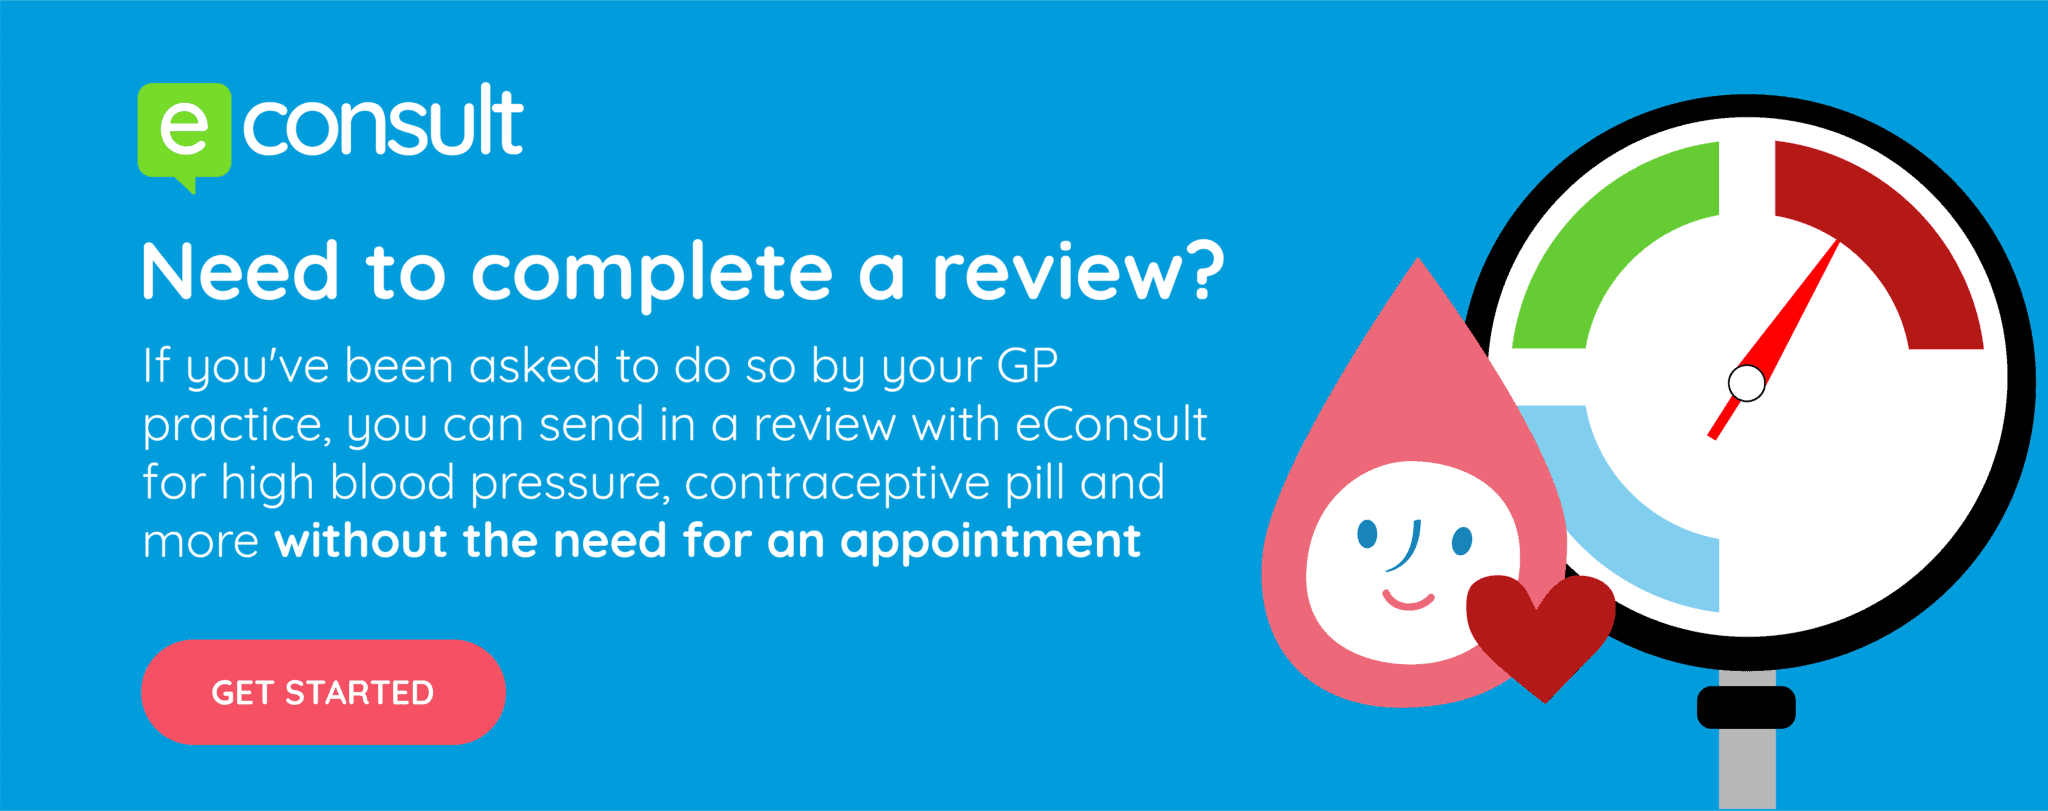 Need to complete a review? Get started online.